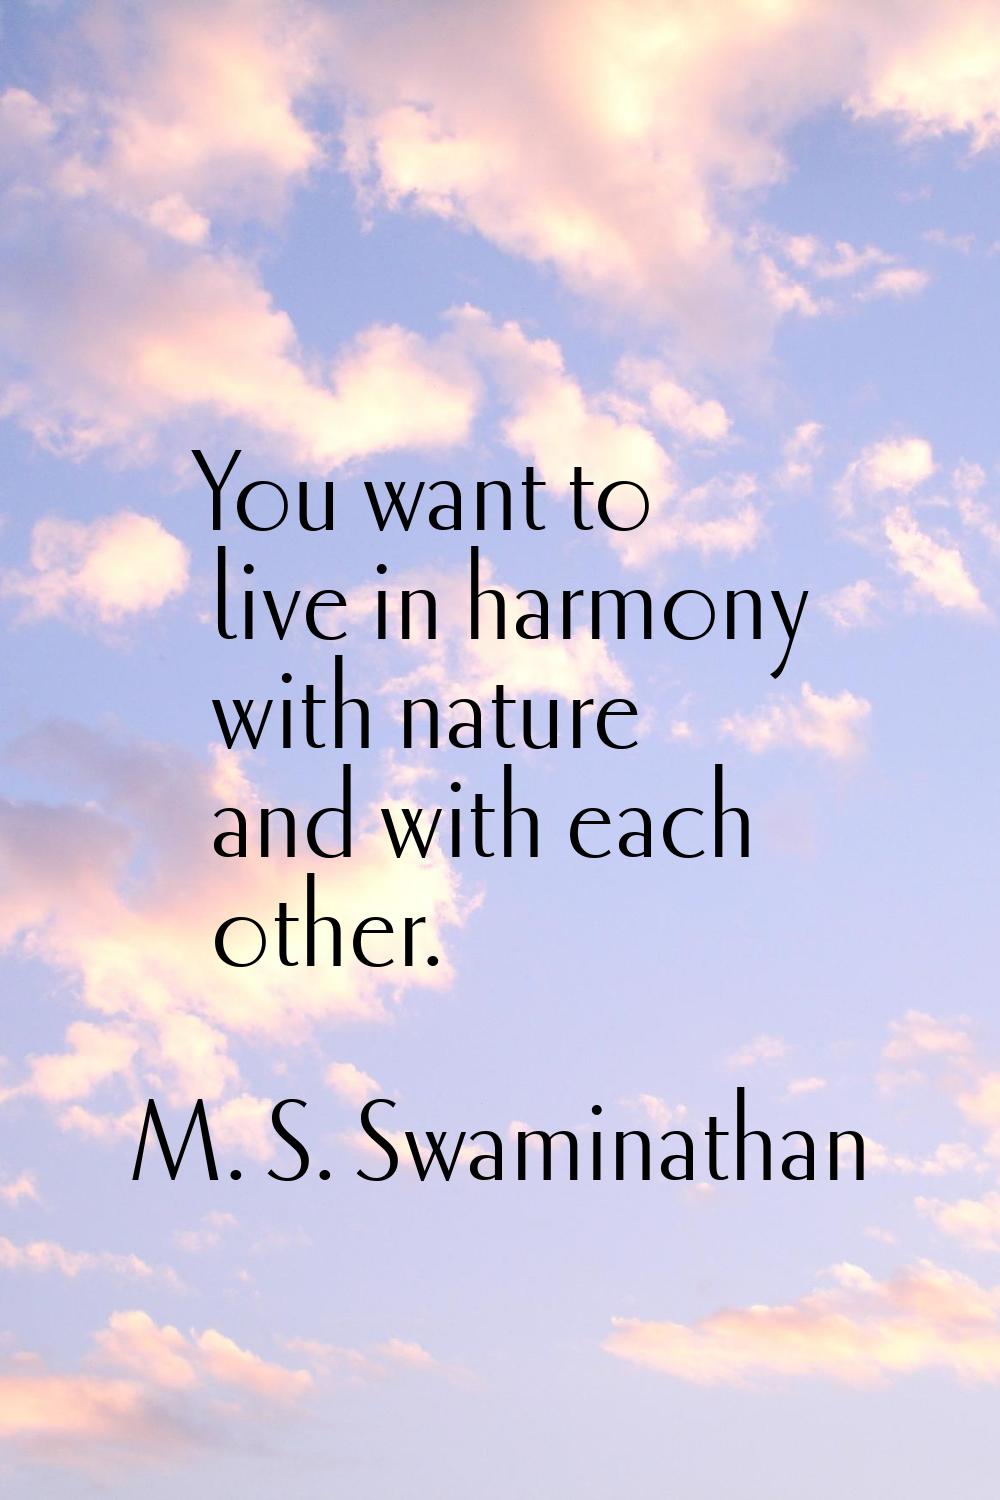 You want to live in harmony with nature and with each other.